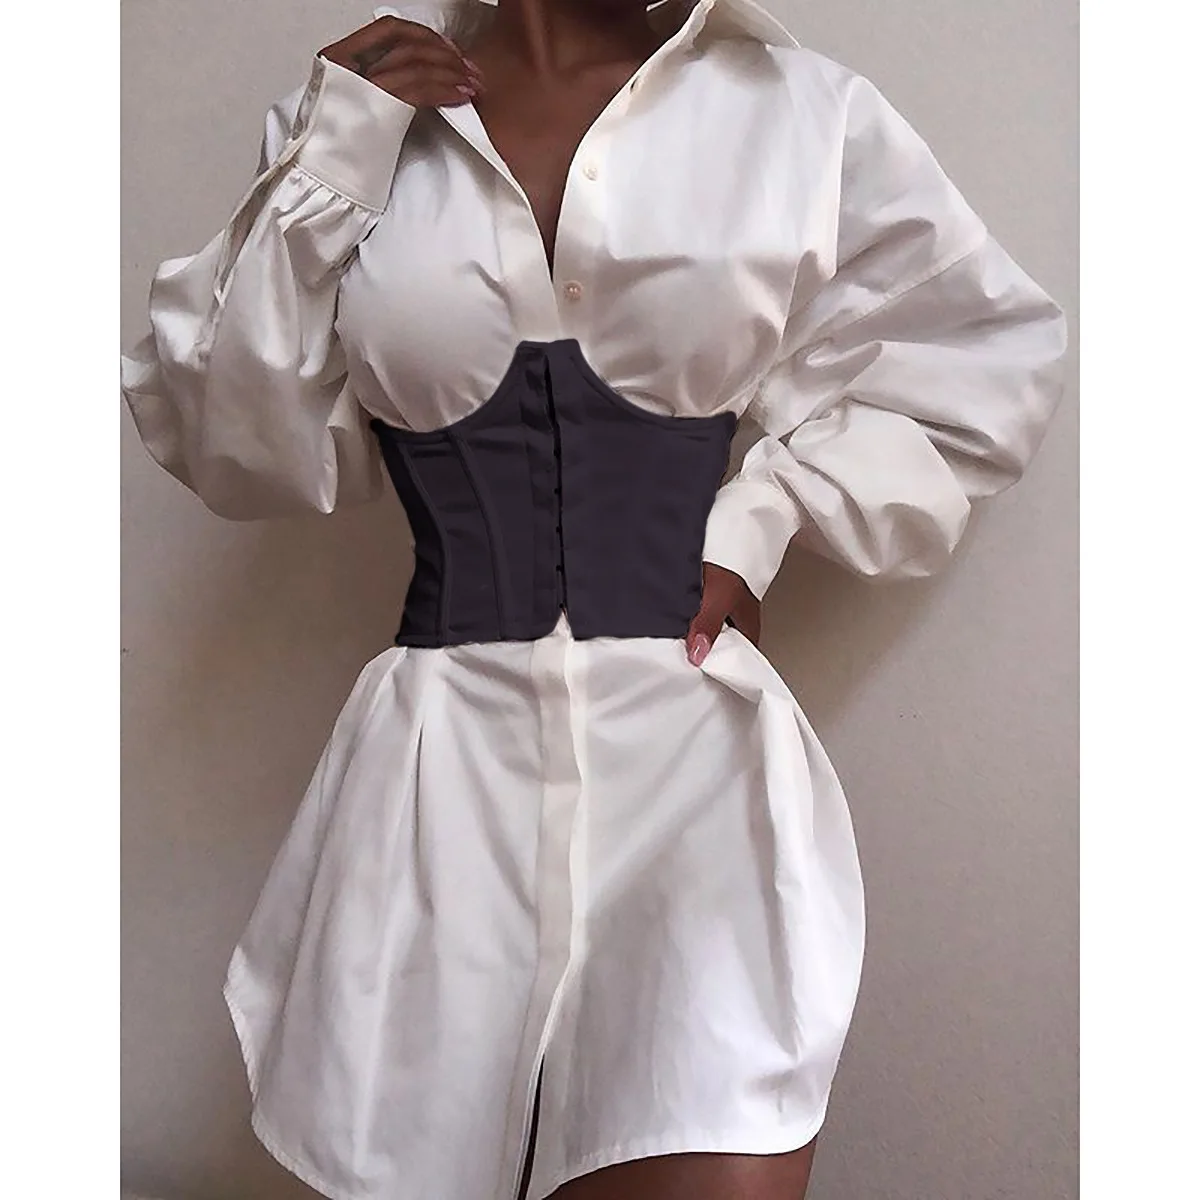 Sexy Wild Beam Waist Corset Solid Color Front-Buckles Cincher with Chest Support Women Ladies Stylish Daily Wear Cummerbunds plus size belts